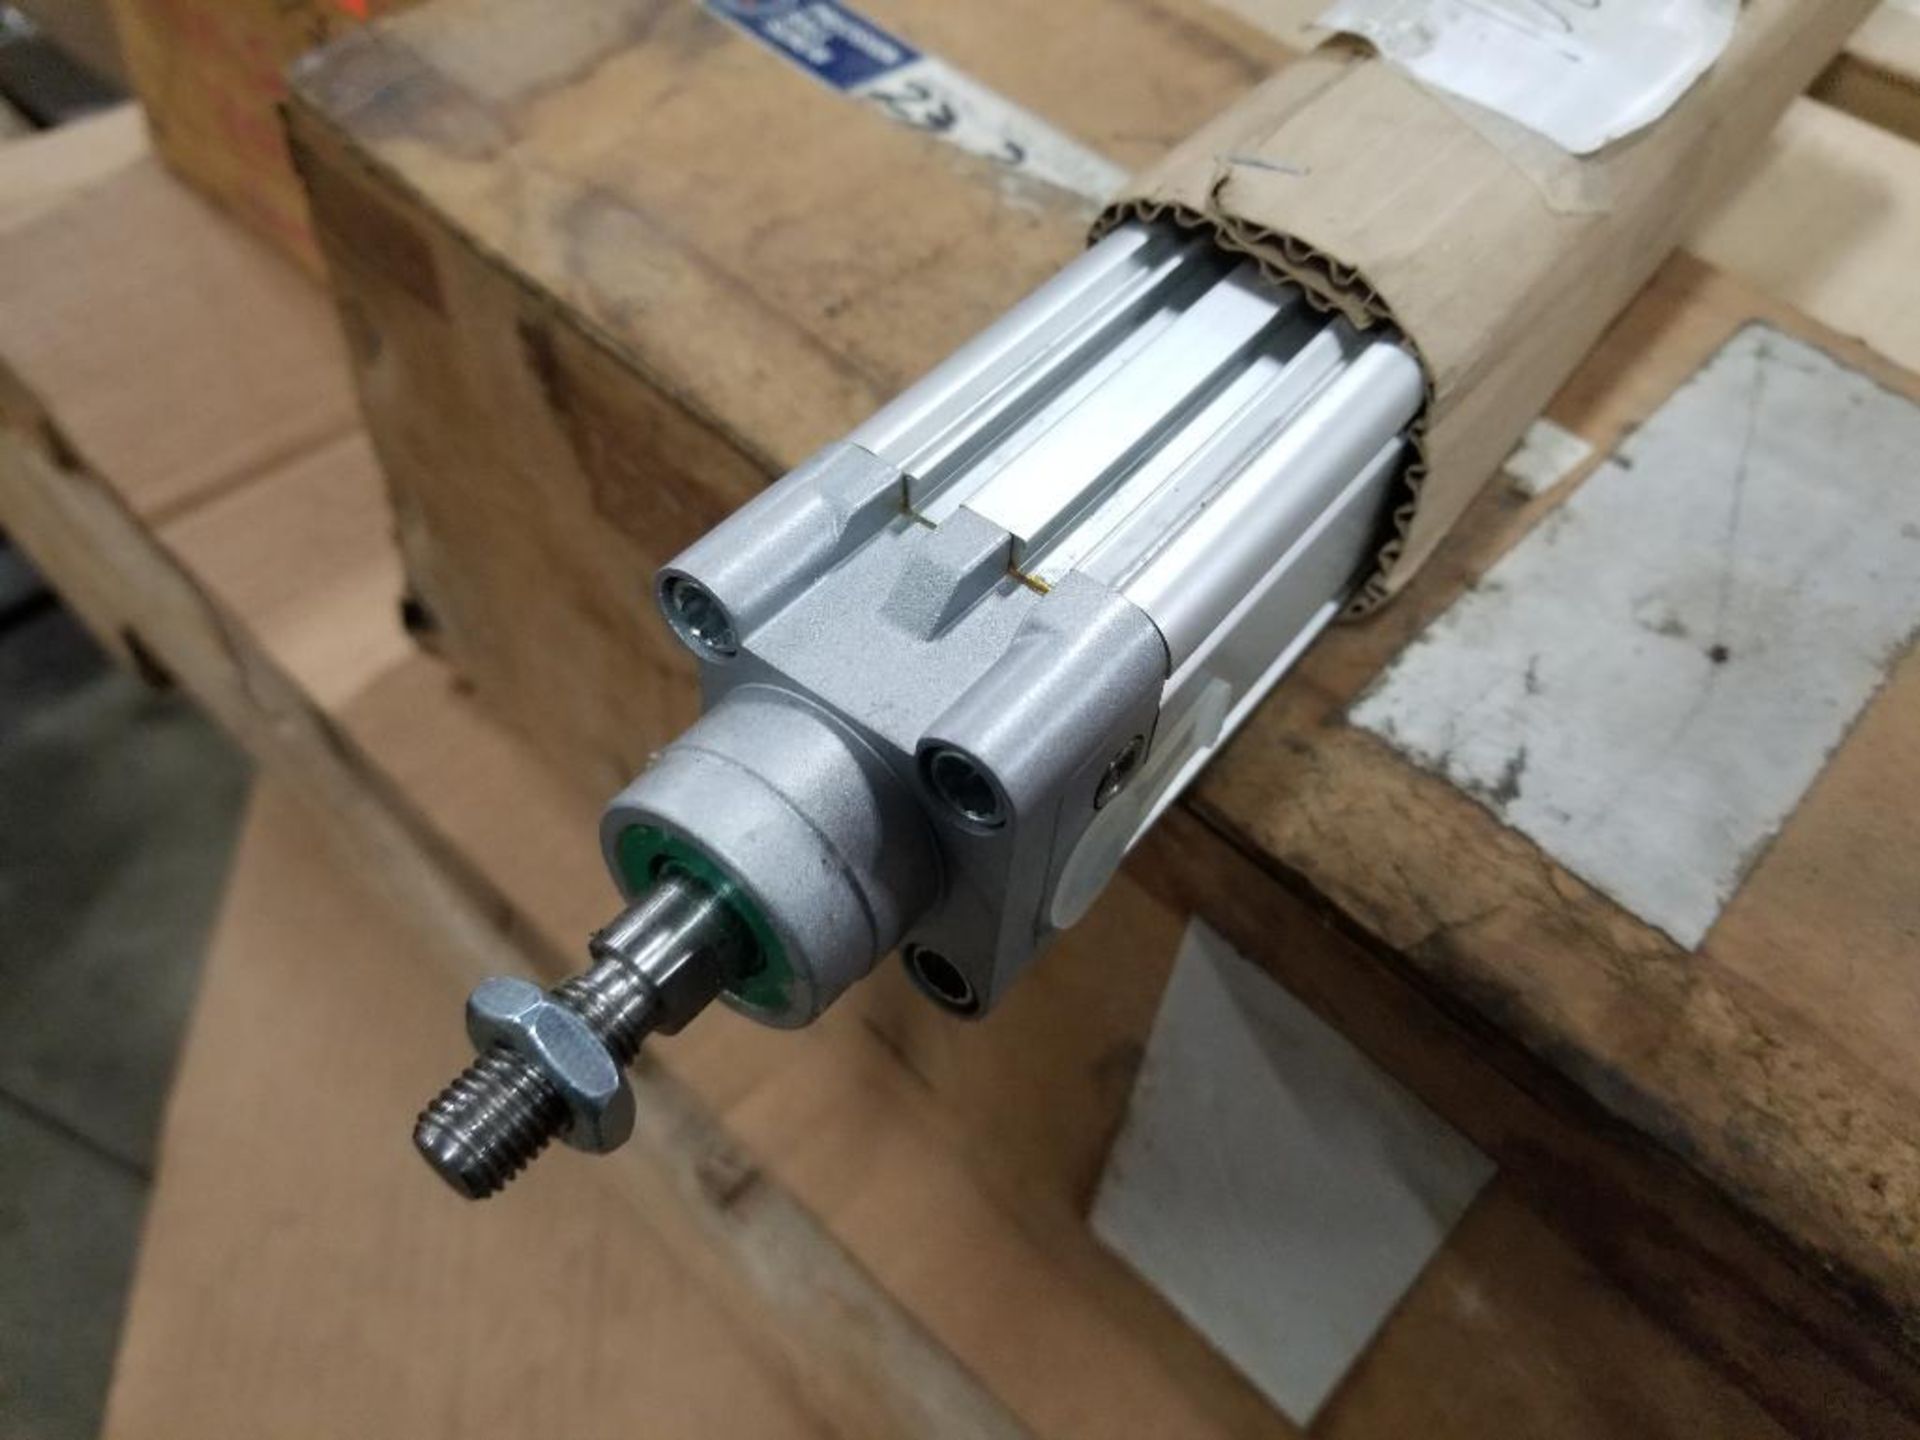 Festo DNC-32-130-PPV-A pneumatic cylinder. New in box.